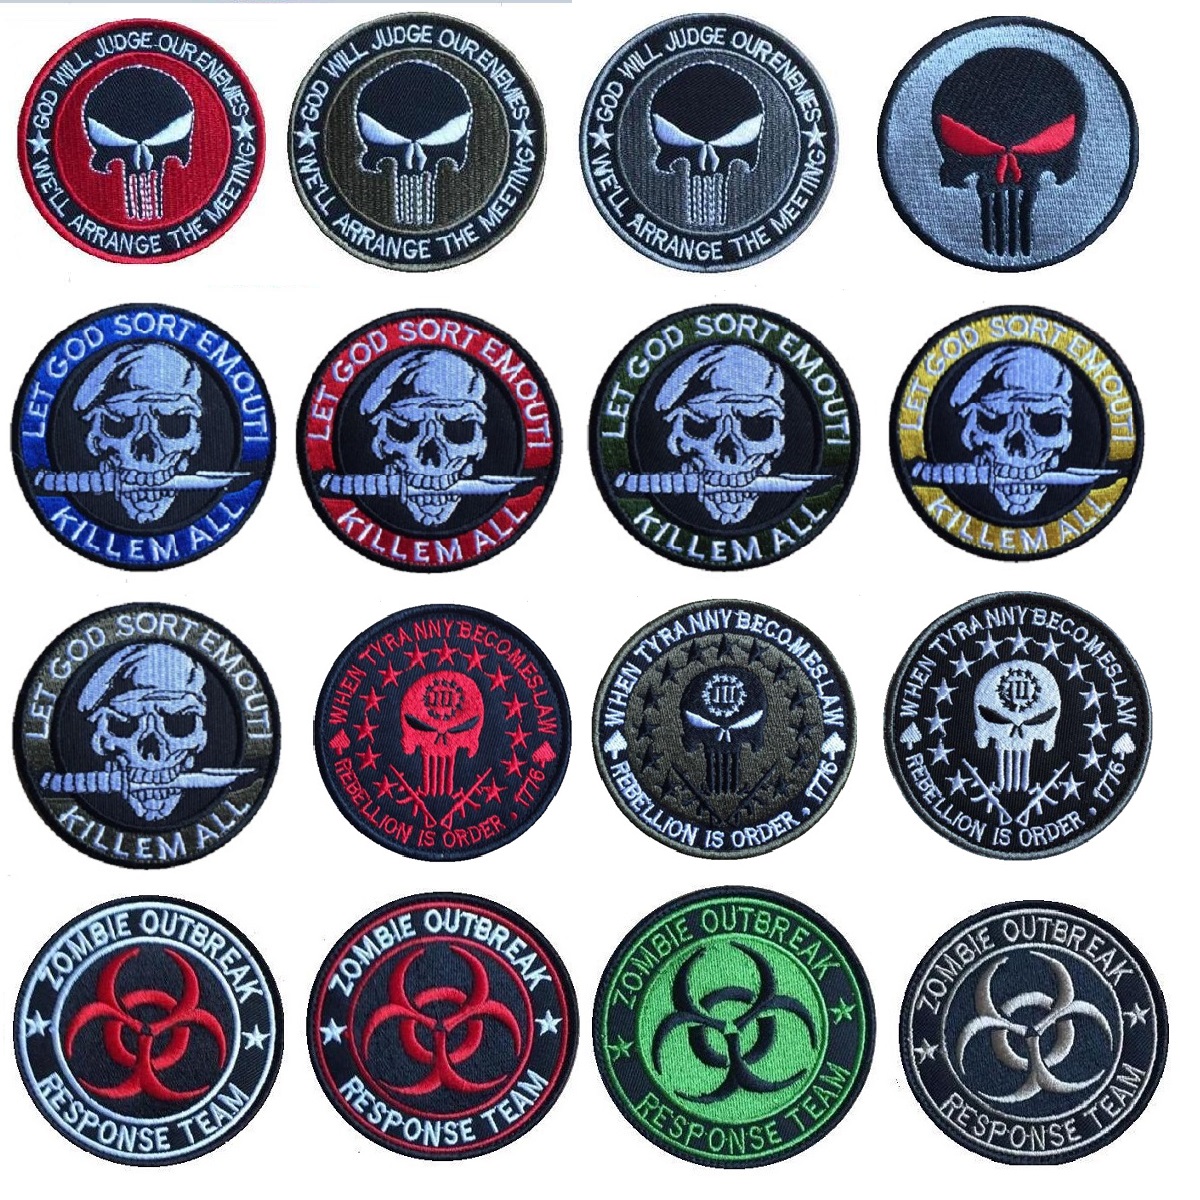 Zombie Outbreak Response Team patch Tactical Morale Slogans Badge Clothes Backpack Labels Embroidered Stickers. Hook&Loop